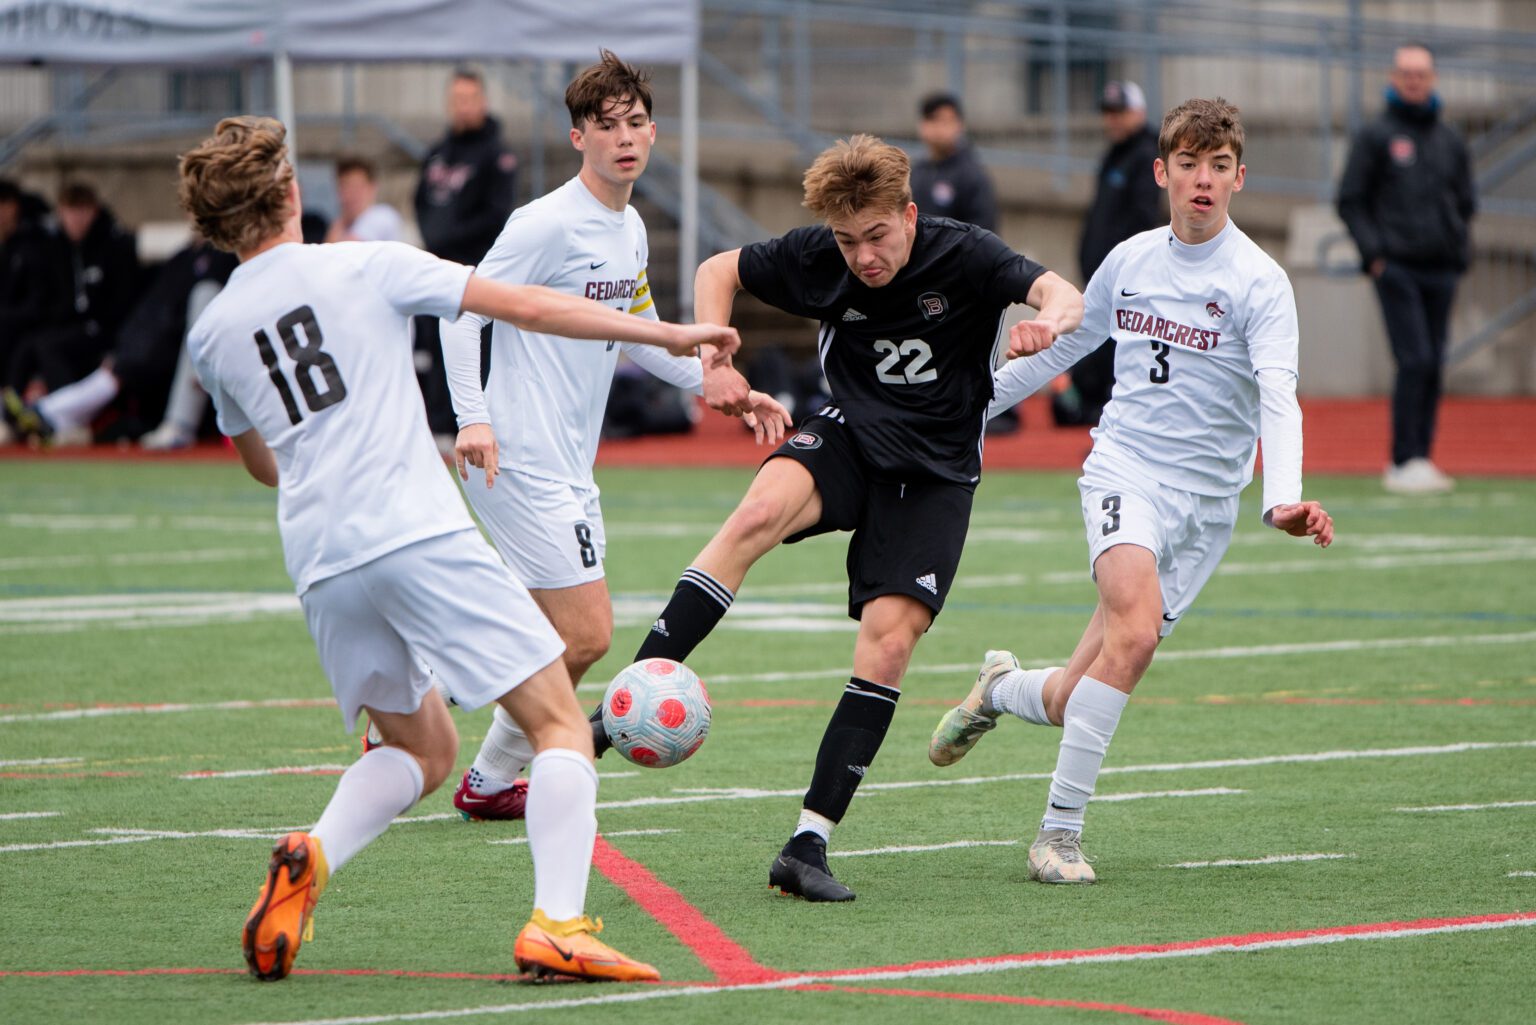 Bellingham junior Judah Straight hits the Bayhawks' second goal of the game May 6 with eight minutes remaining in the first half of a 2-1 win over Cedarcrest in the first round of the 2A District 1 tournament.